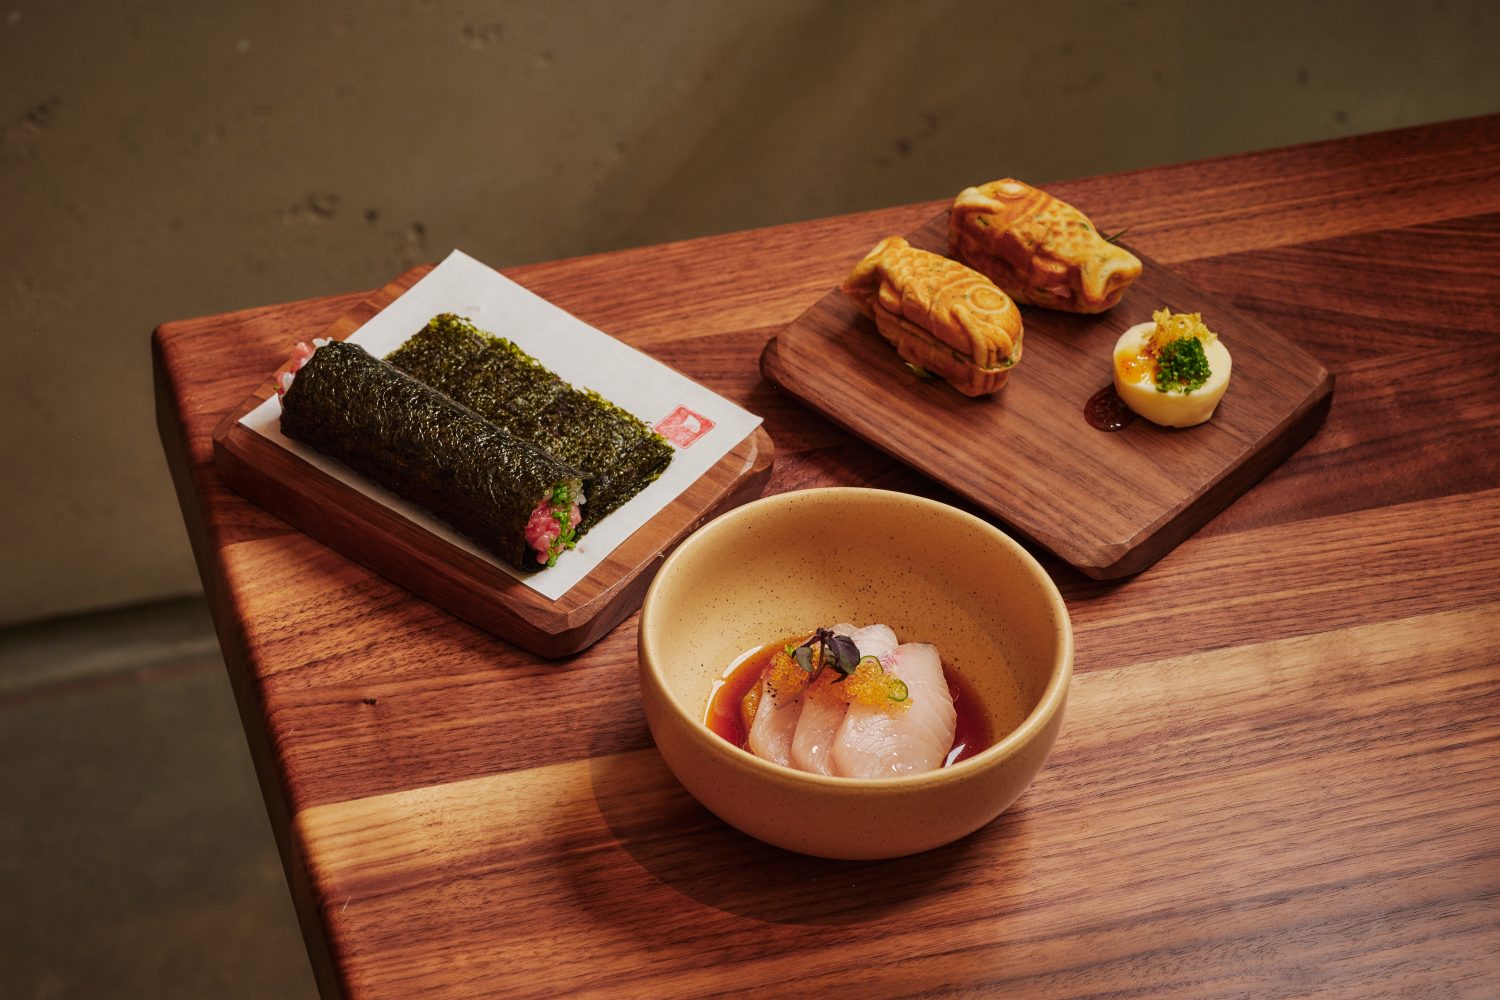 two hand rolls on a plate, three slices of sashimi in a bowl, two fish-shaped pastries 